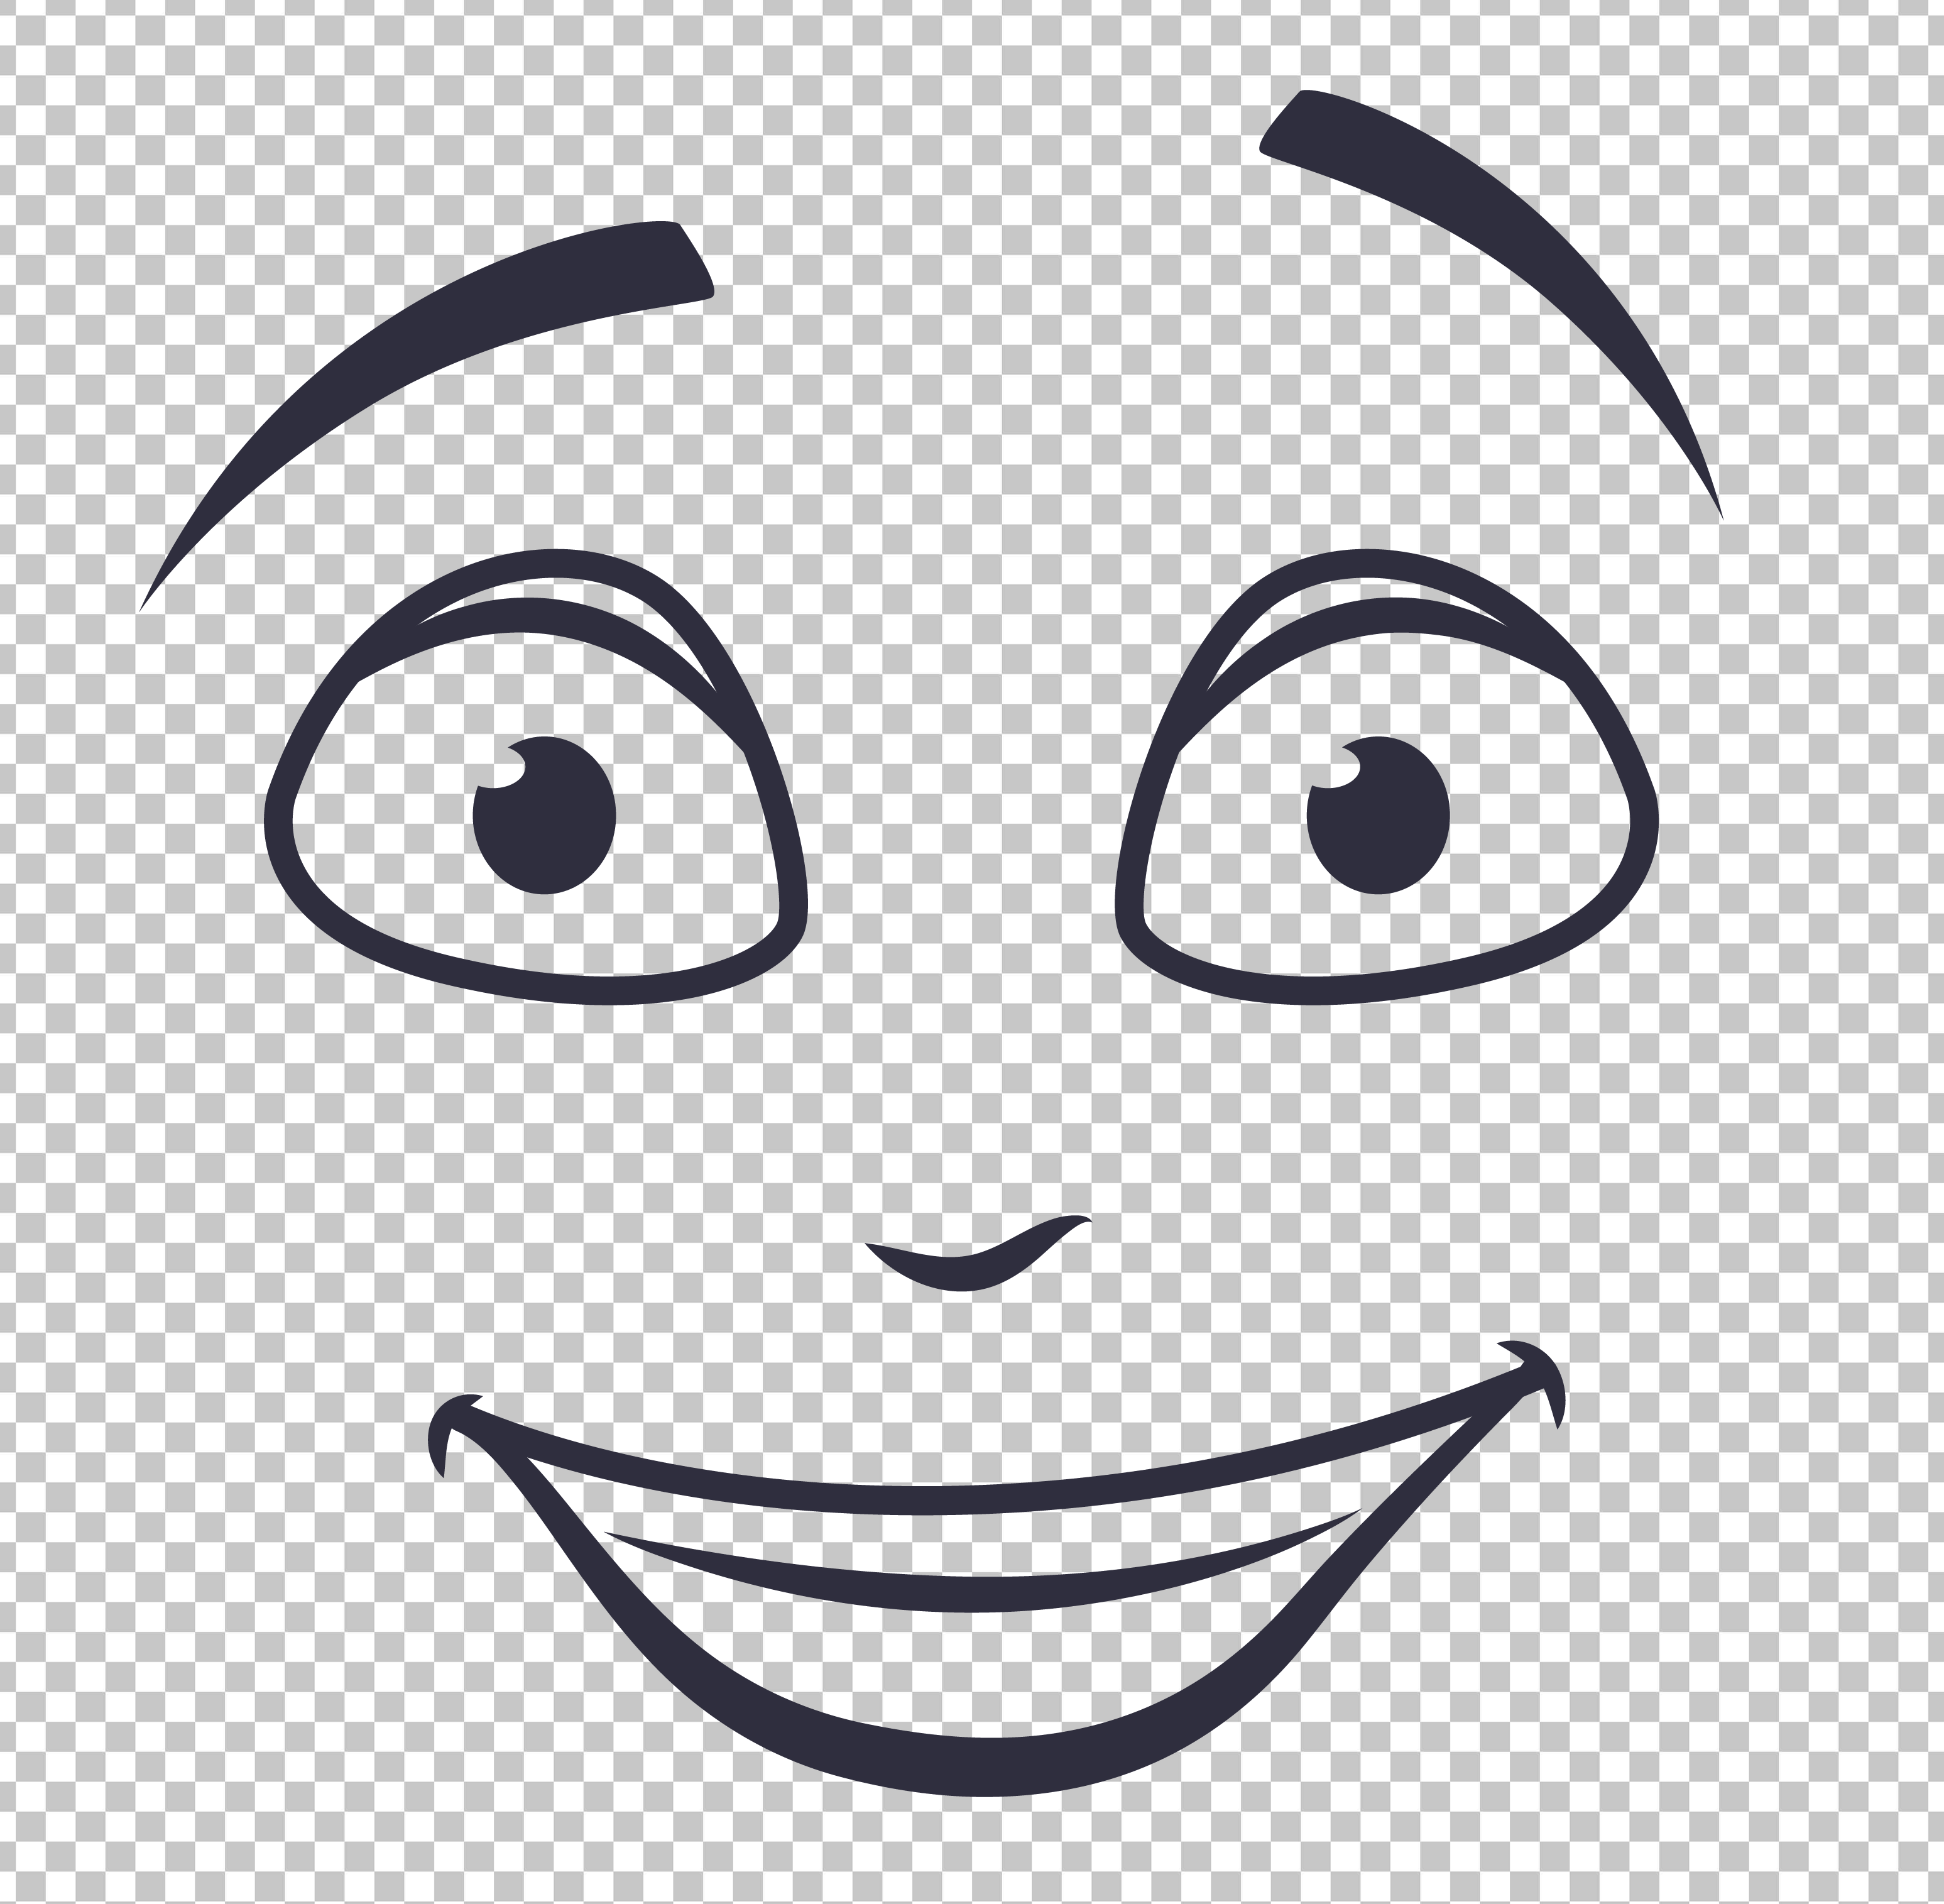 Cartoon Face Smiling with Big Eyes and Teeth PNG Image.